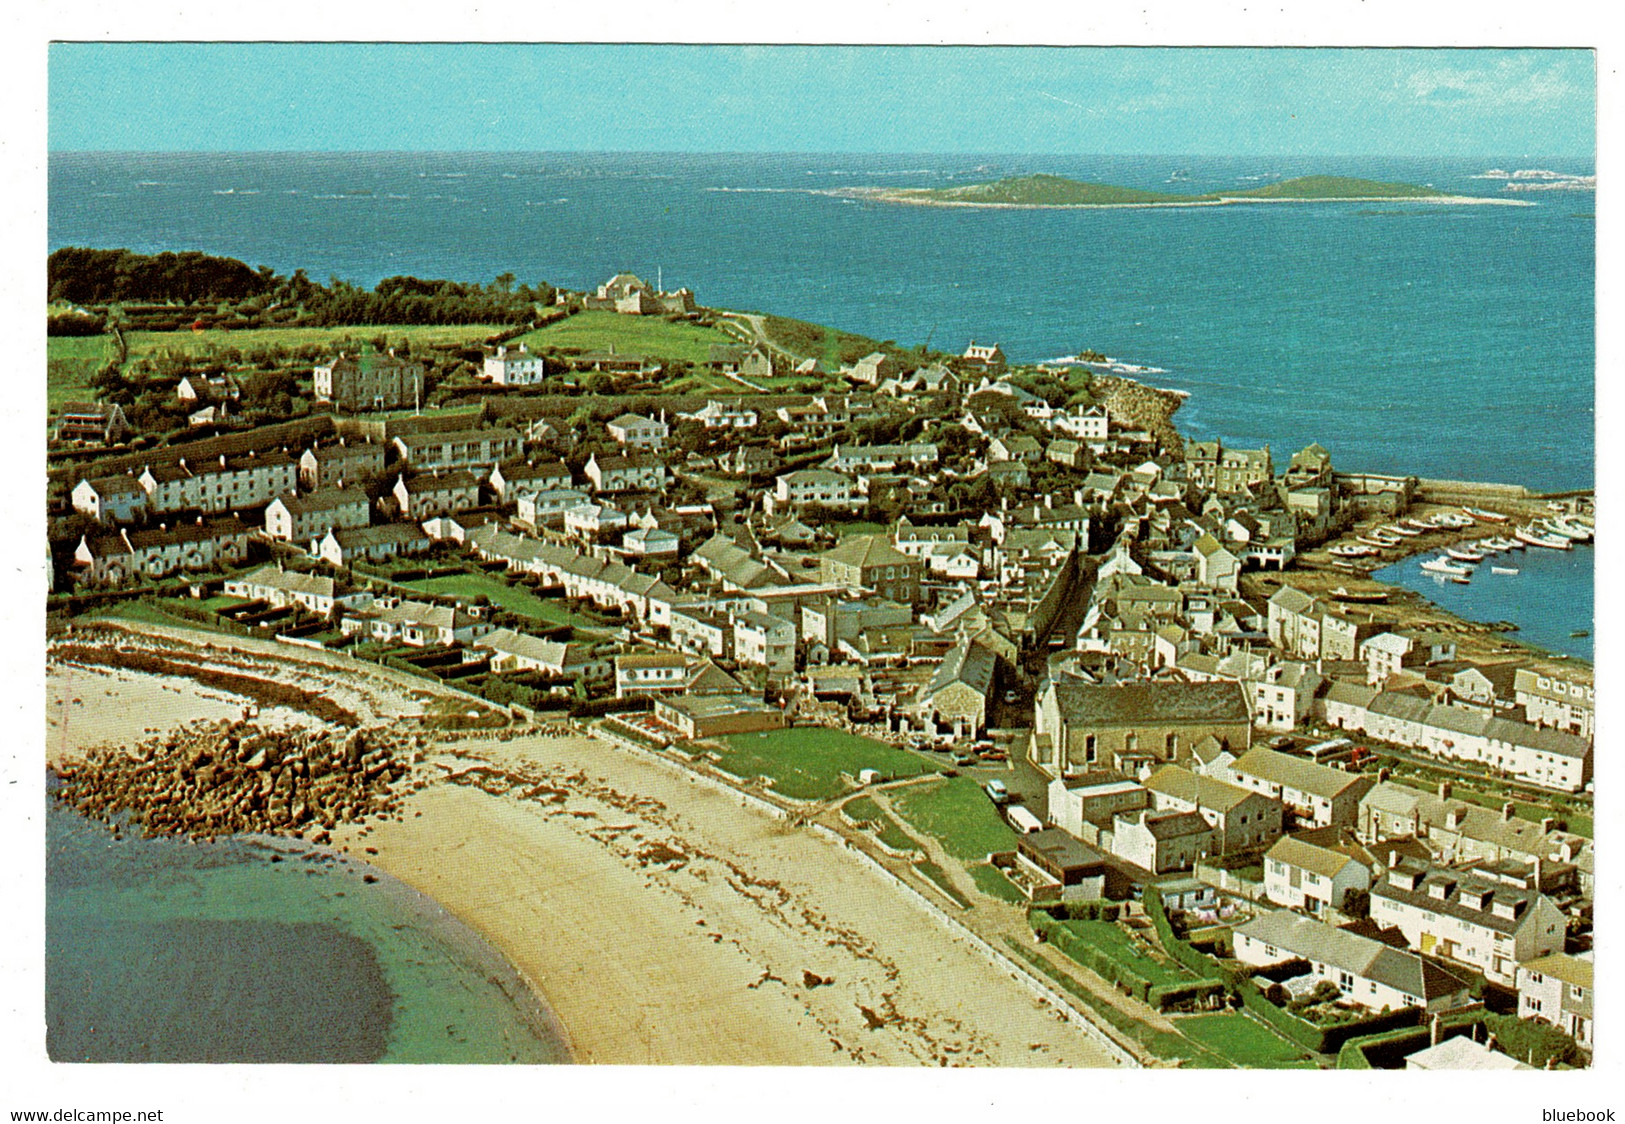 Ref 1462 - Postcard - Aerial View Porthcressa Beach & Hugh Town - St Mary's Isles Of Scilly - Scilly Isles